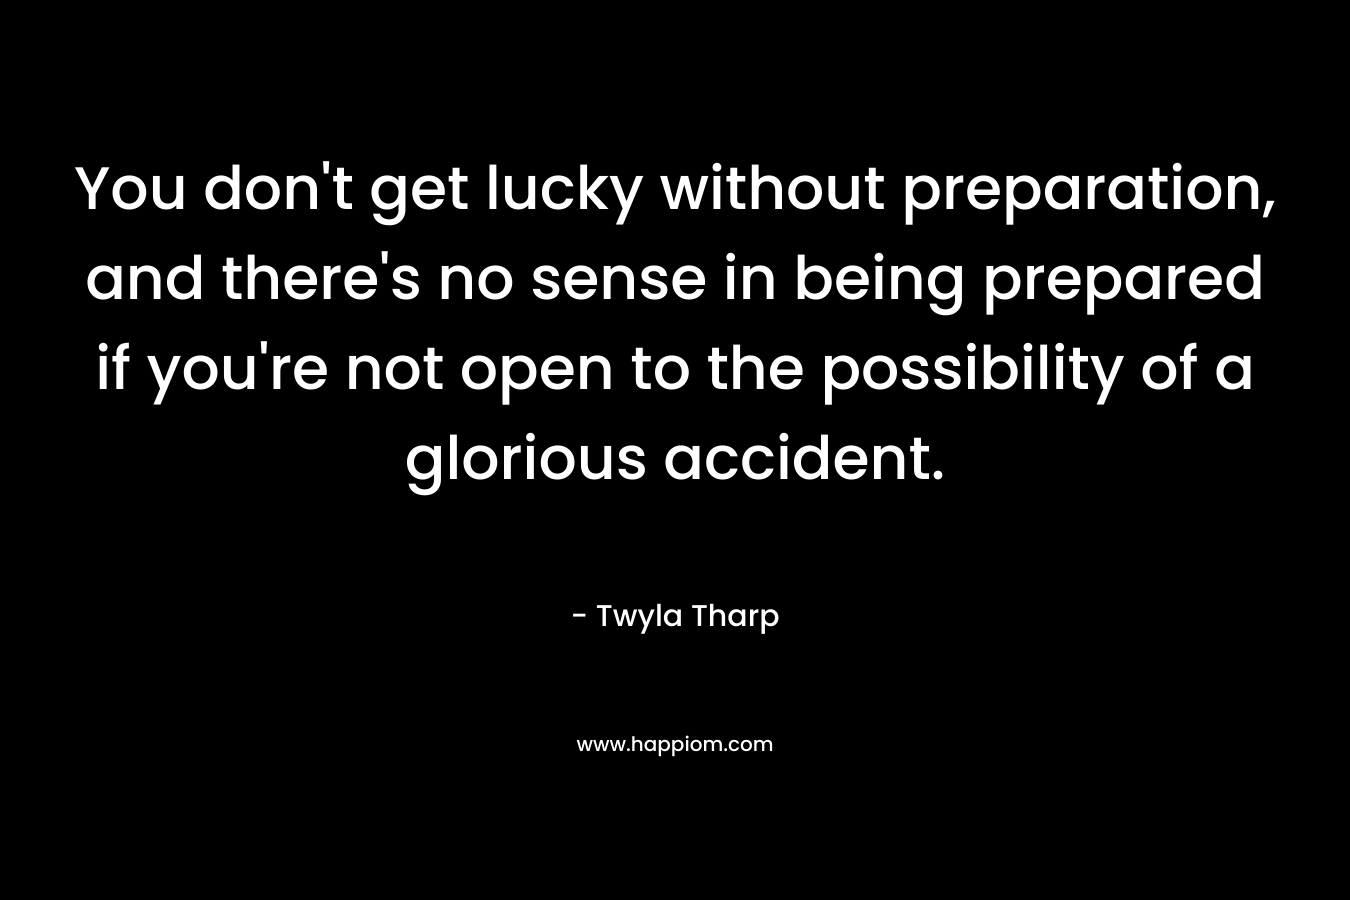 You don’t get lucky without preparation, and there’s no sense in being prepared if you’re not open to the possibility of a glorious accident. – Twyla Tharp